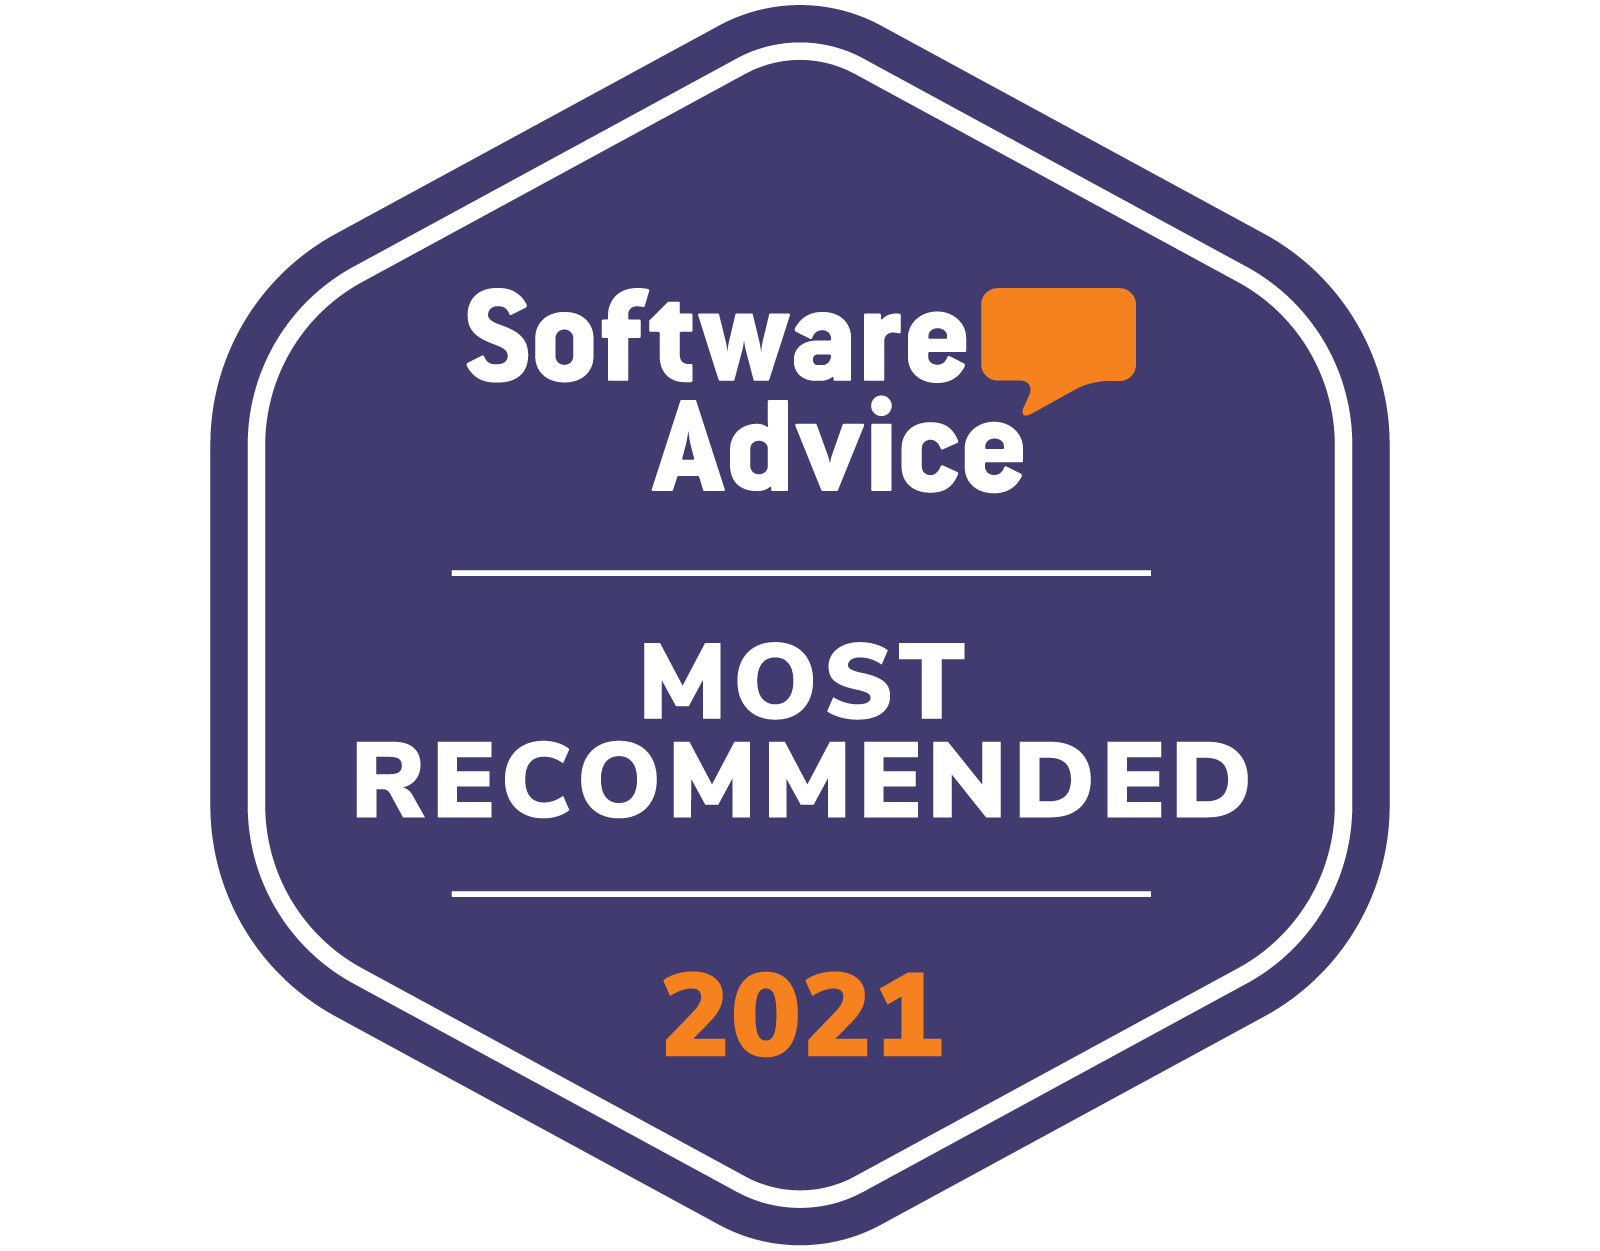 Software Advice Most Recommended 2021 Badge